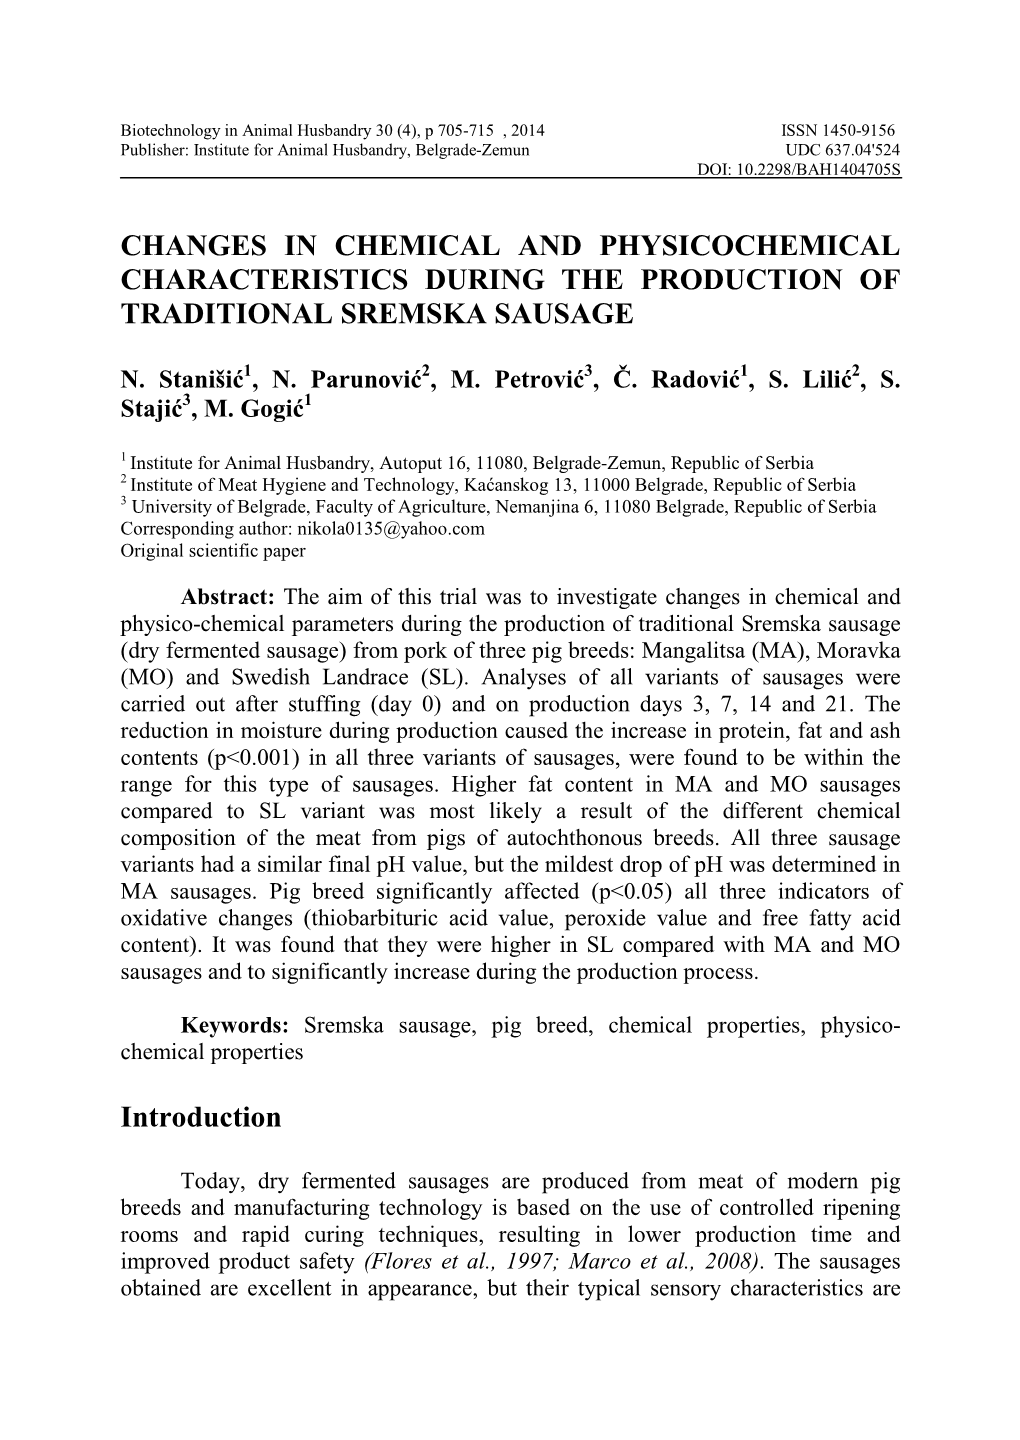 Changes in Chemical and Physicochemical Characteristics During the Production of Traditional Sremska Sausage